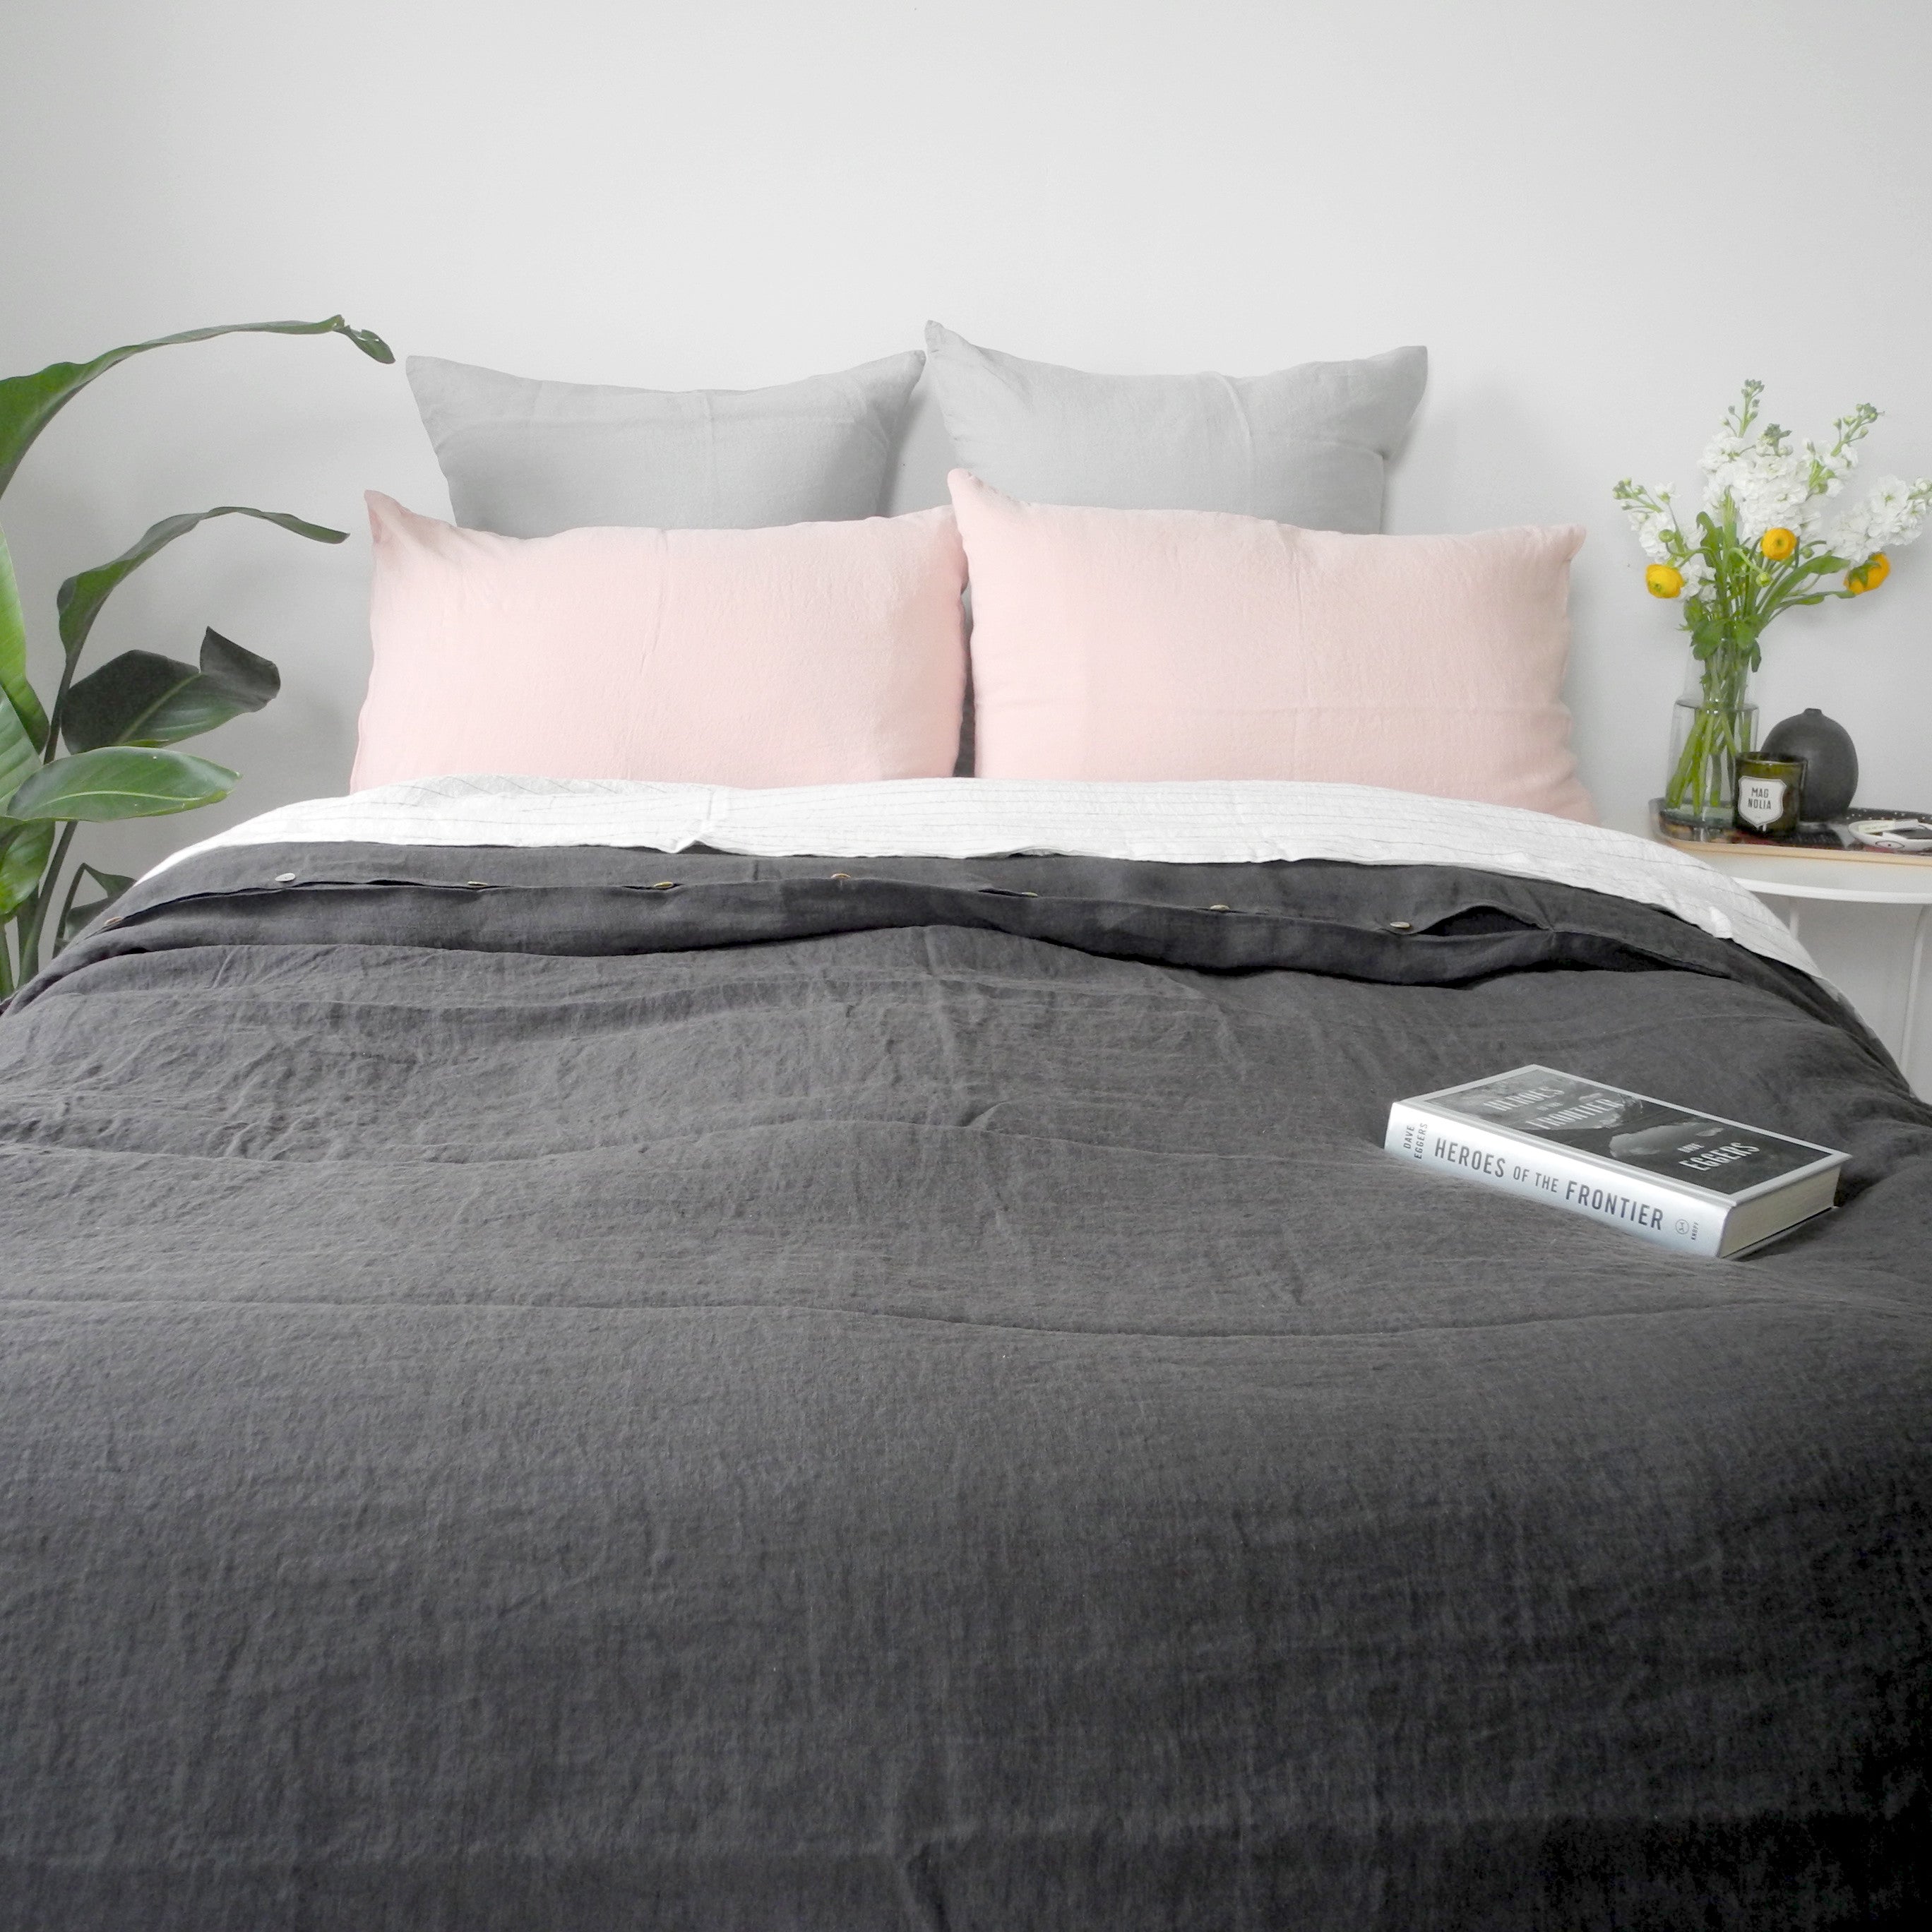 A Linge Particulier Linen Duvet in Storm Grey gives a charcoal and slate color to this duvet for a gray colorful linen bedding look from Collyer's Mansion